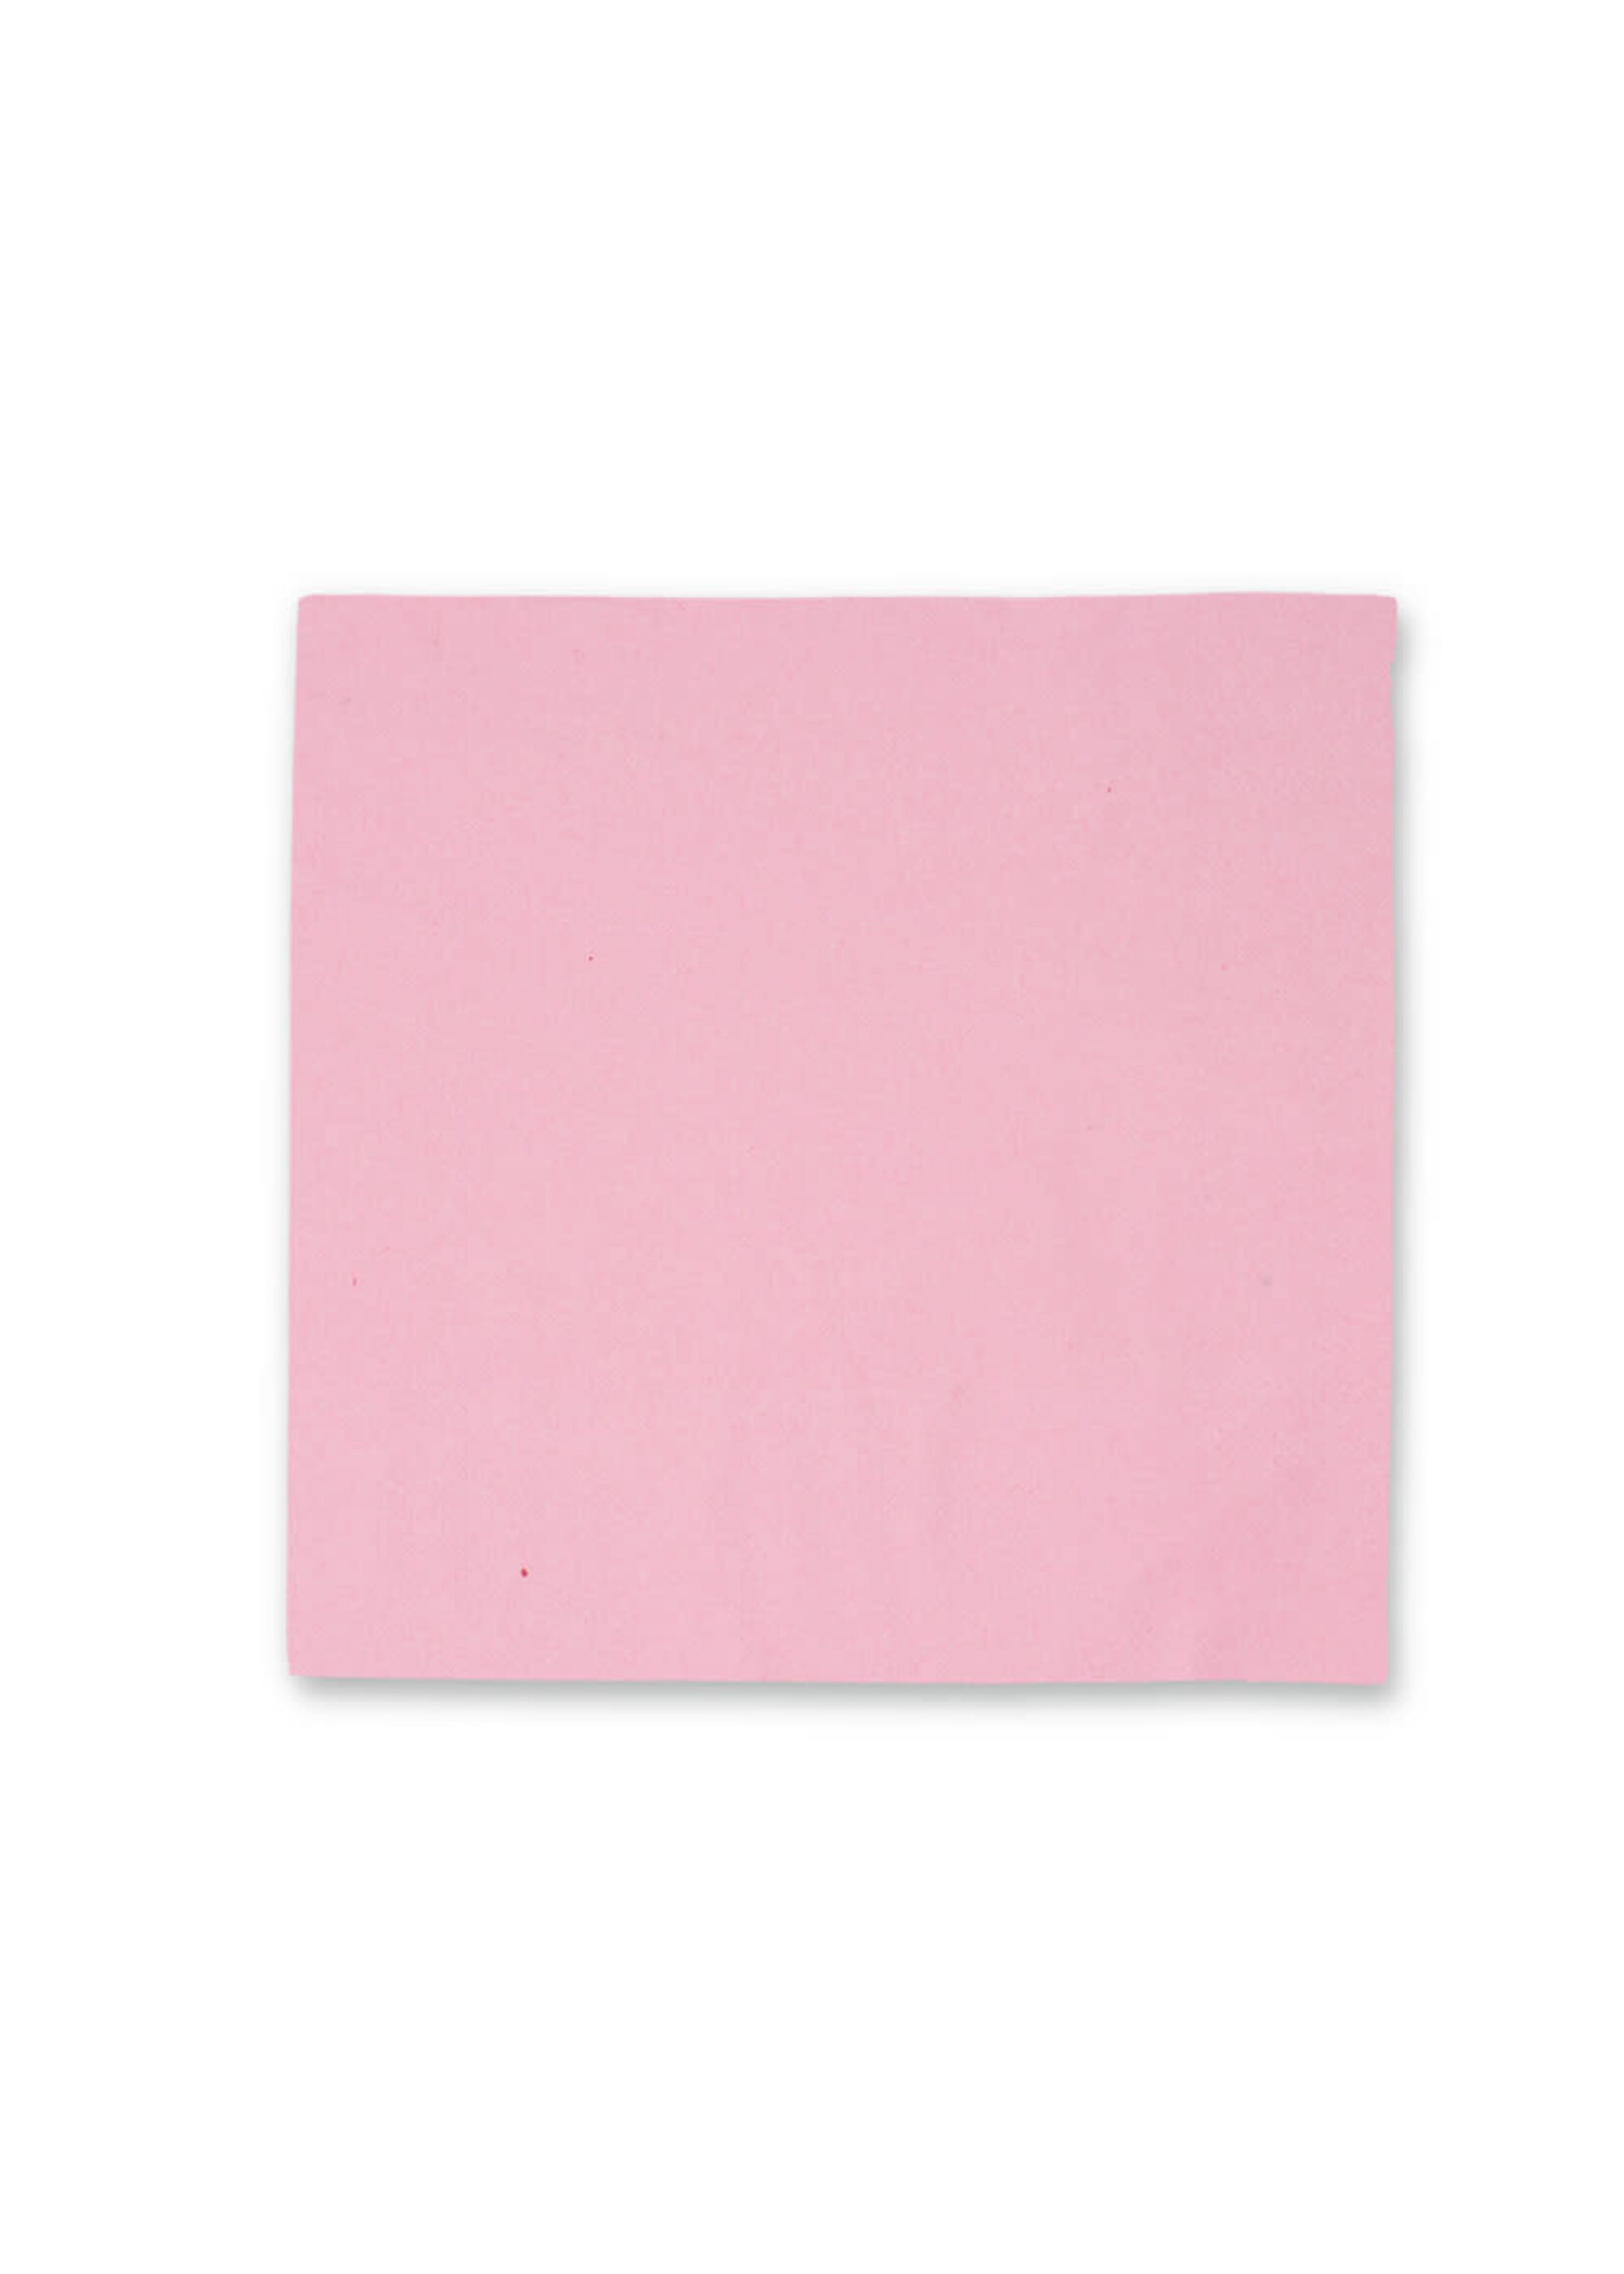 LUNCH NAPKIN 50CT 2PLY PINK